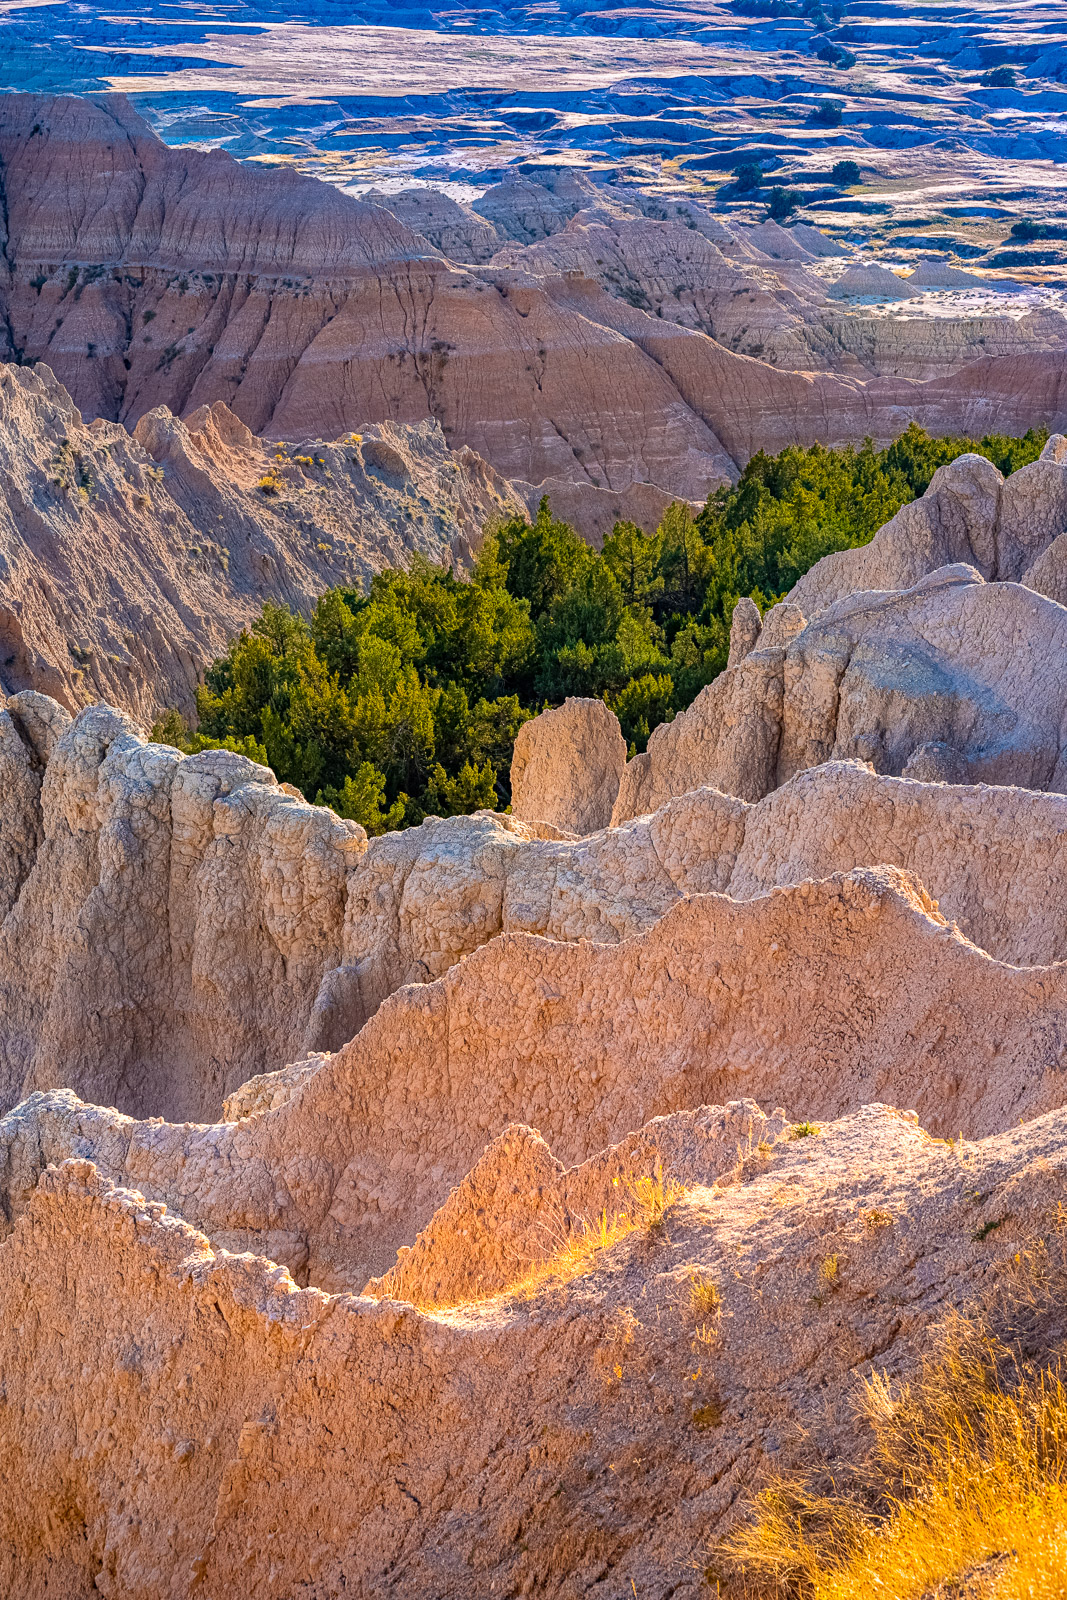 These erosional fins are delicately colored in hues of pink and yellow by the late afternoon light in Badlands National Park, South Dakota.